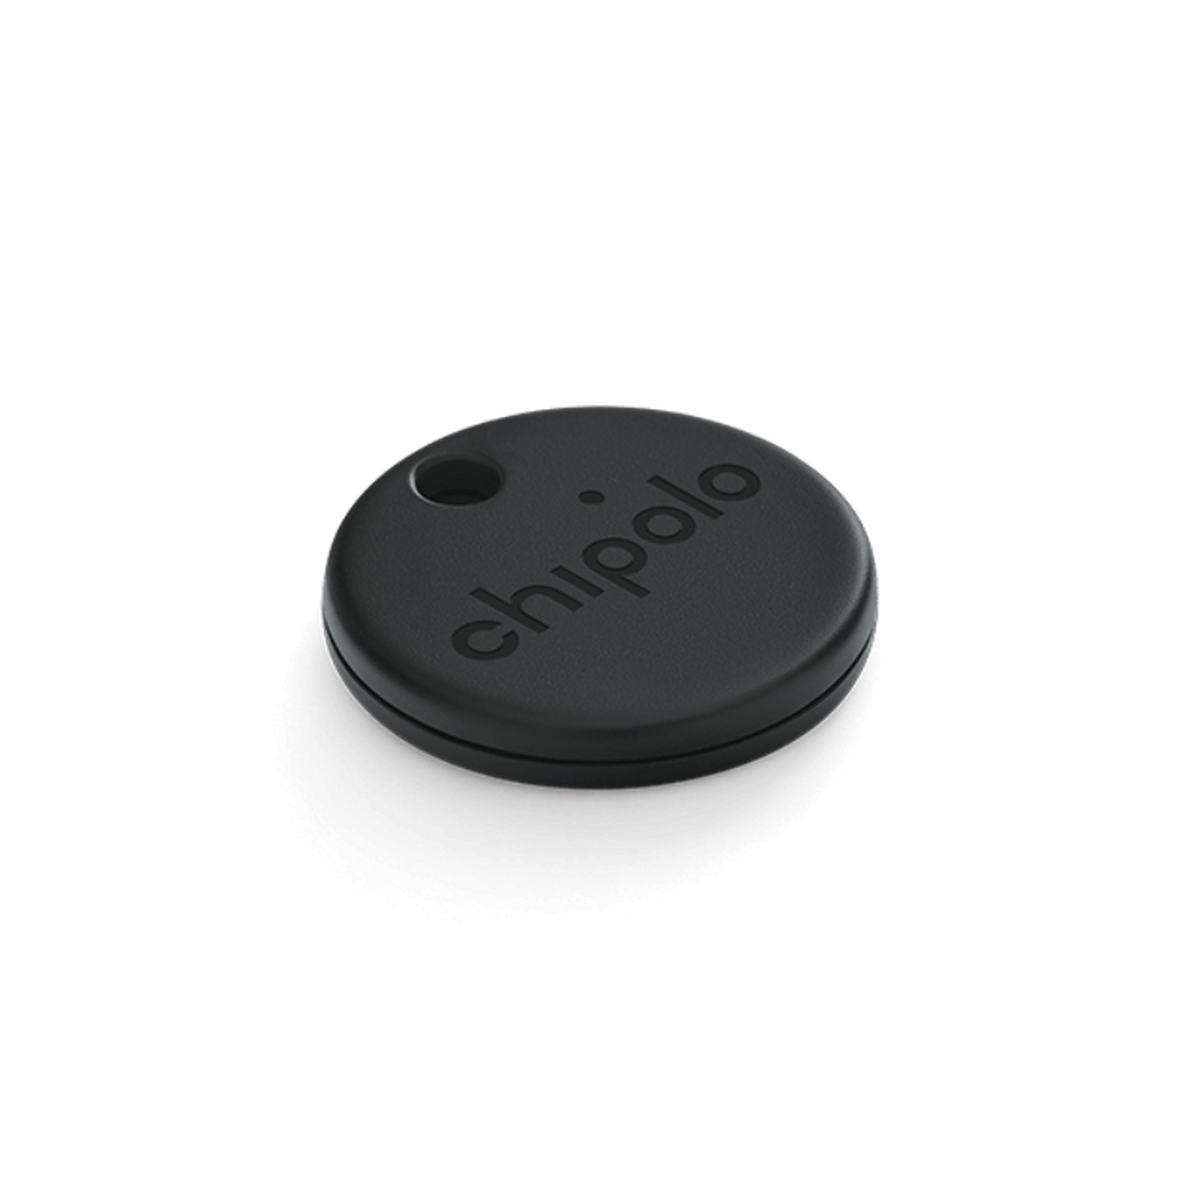 Chipolo ONE Black 2020 - Loudest Water Resistant Bluetooth Key Finder 